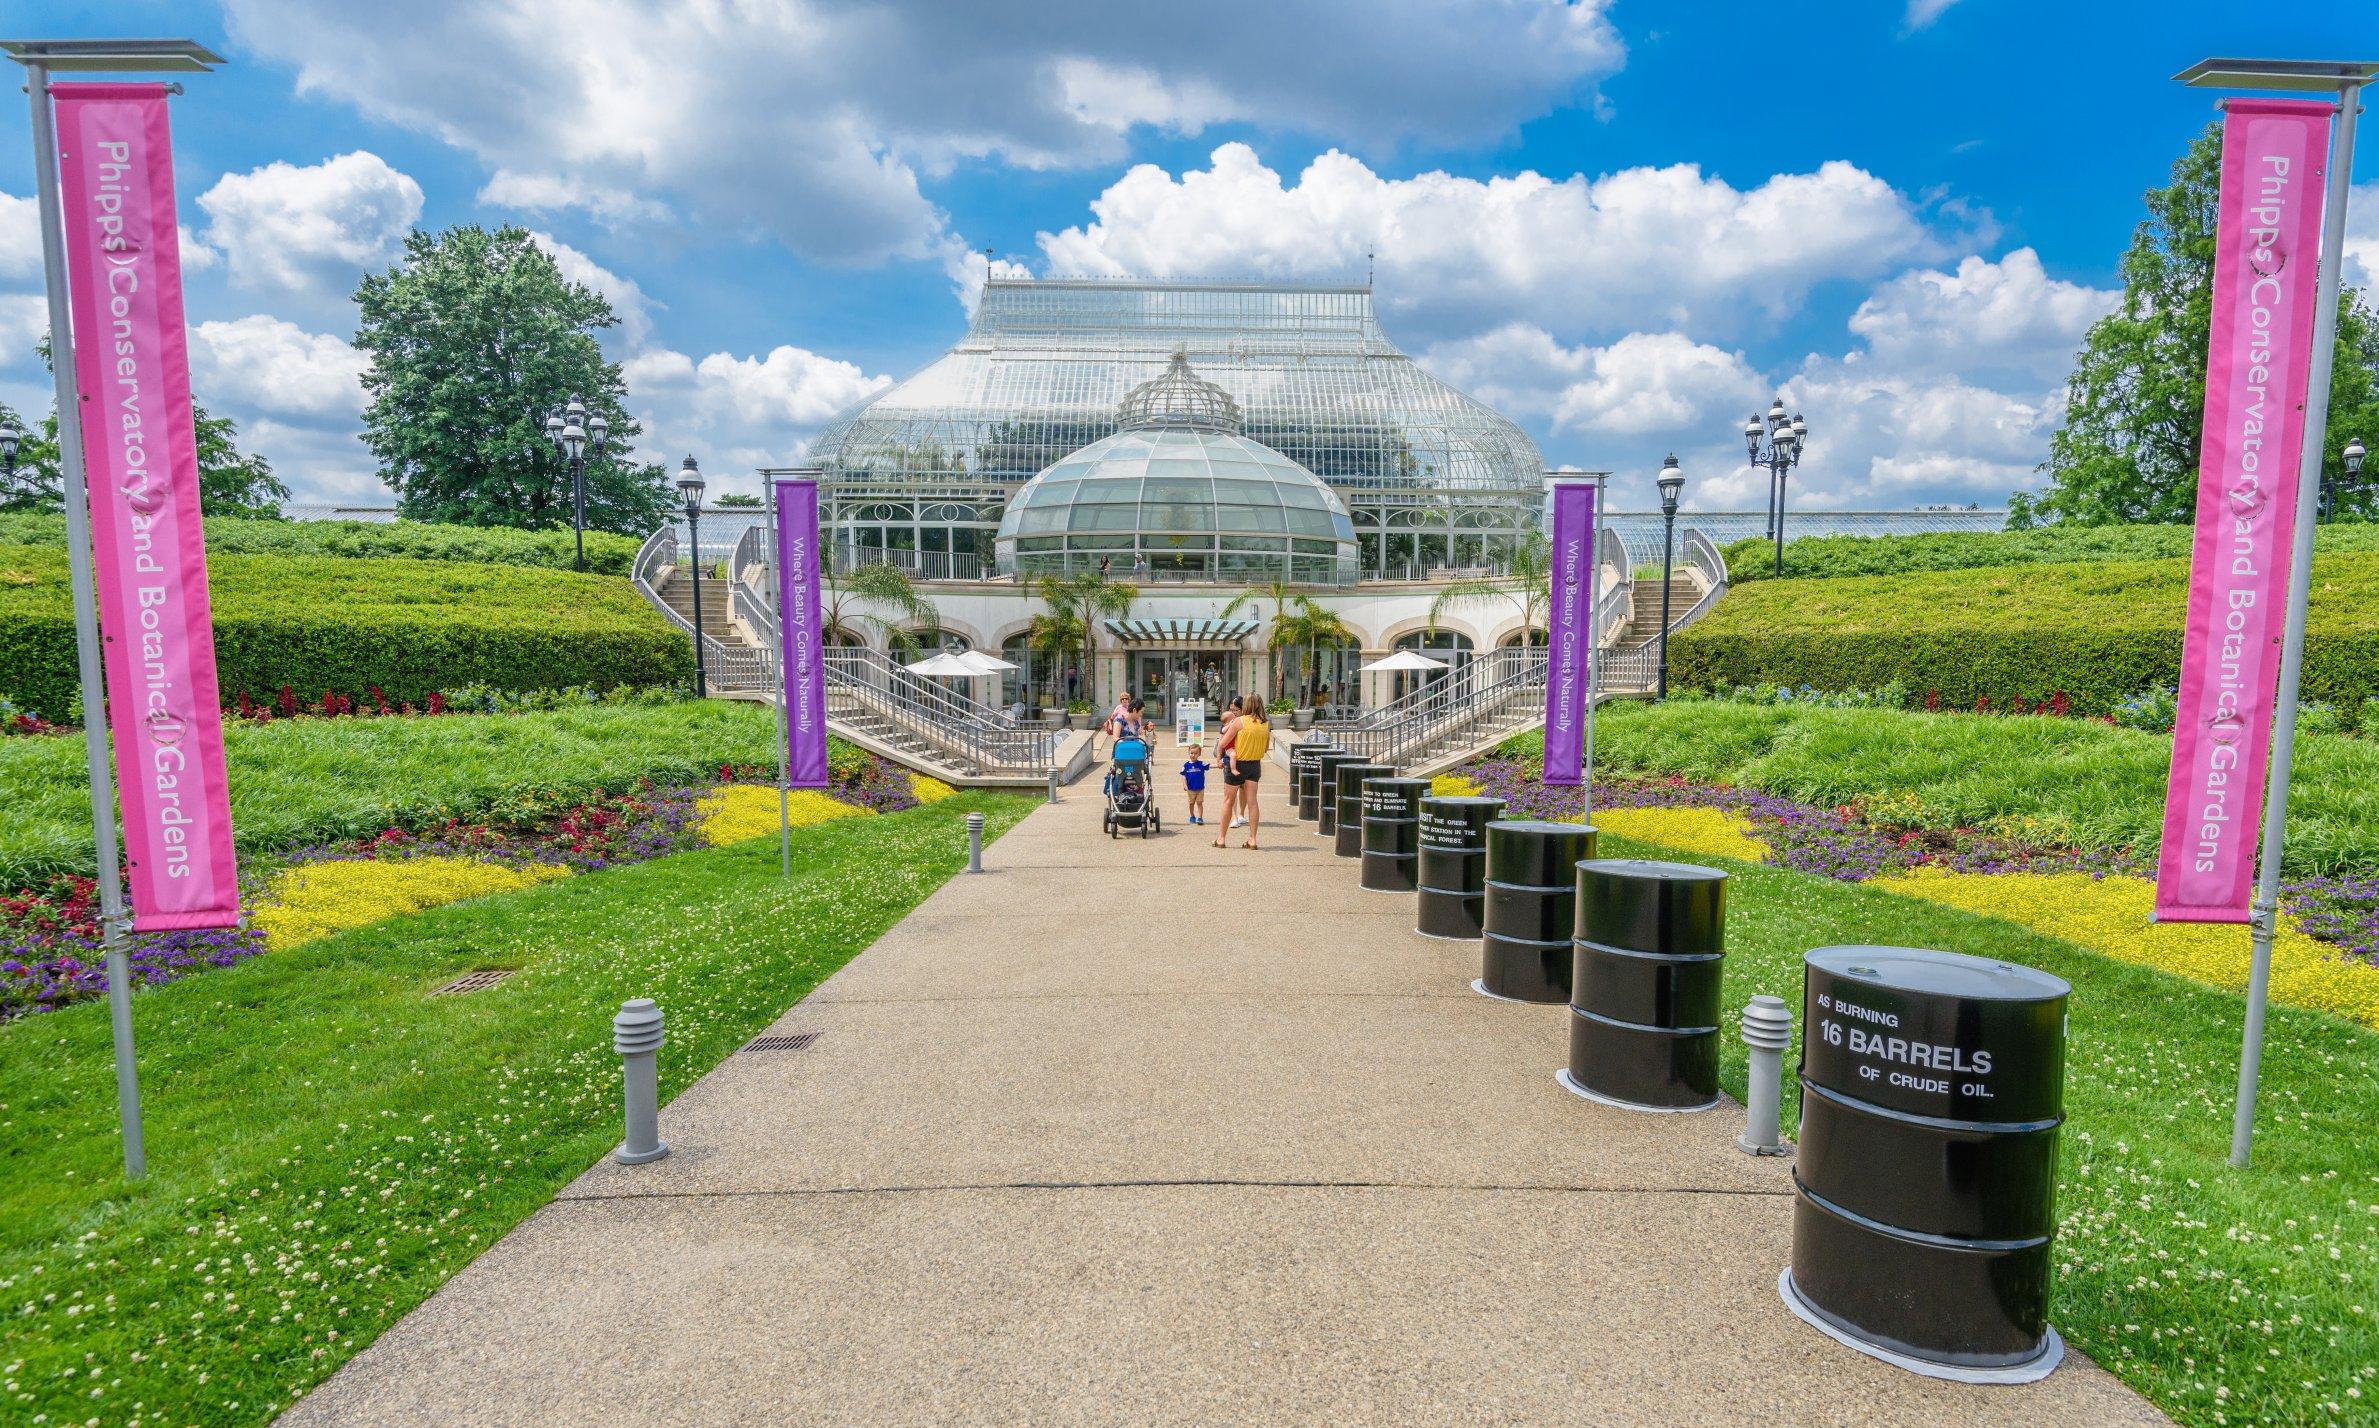 In a new display at Phipps' entrance, 16 oil barrels in a line show visitors the amount of CO2 they can prevent from being released into the atmosphere by switching to renewable energy.